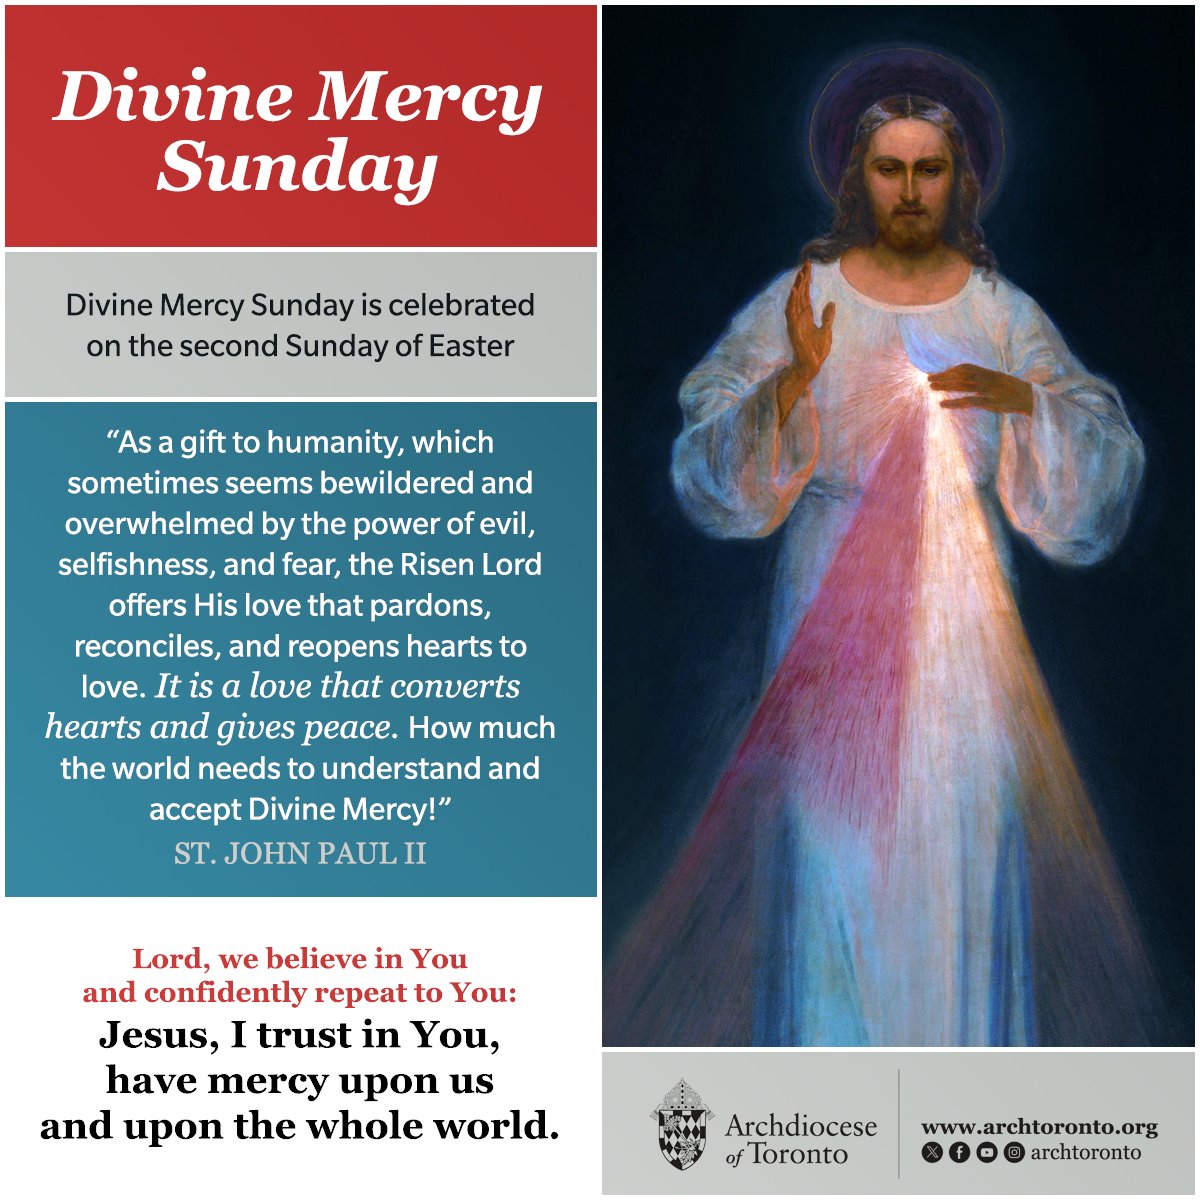 As we celebrate #DivineMercy Sunday on this second Sunday of Easter, let us pray: Jesus, I trust in You, have mercy upon us and upon the whole world.